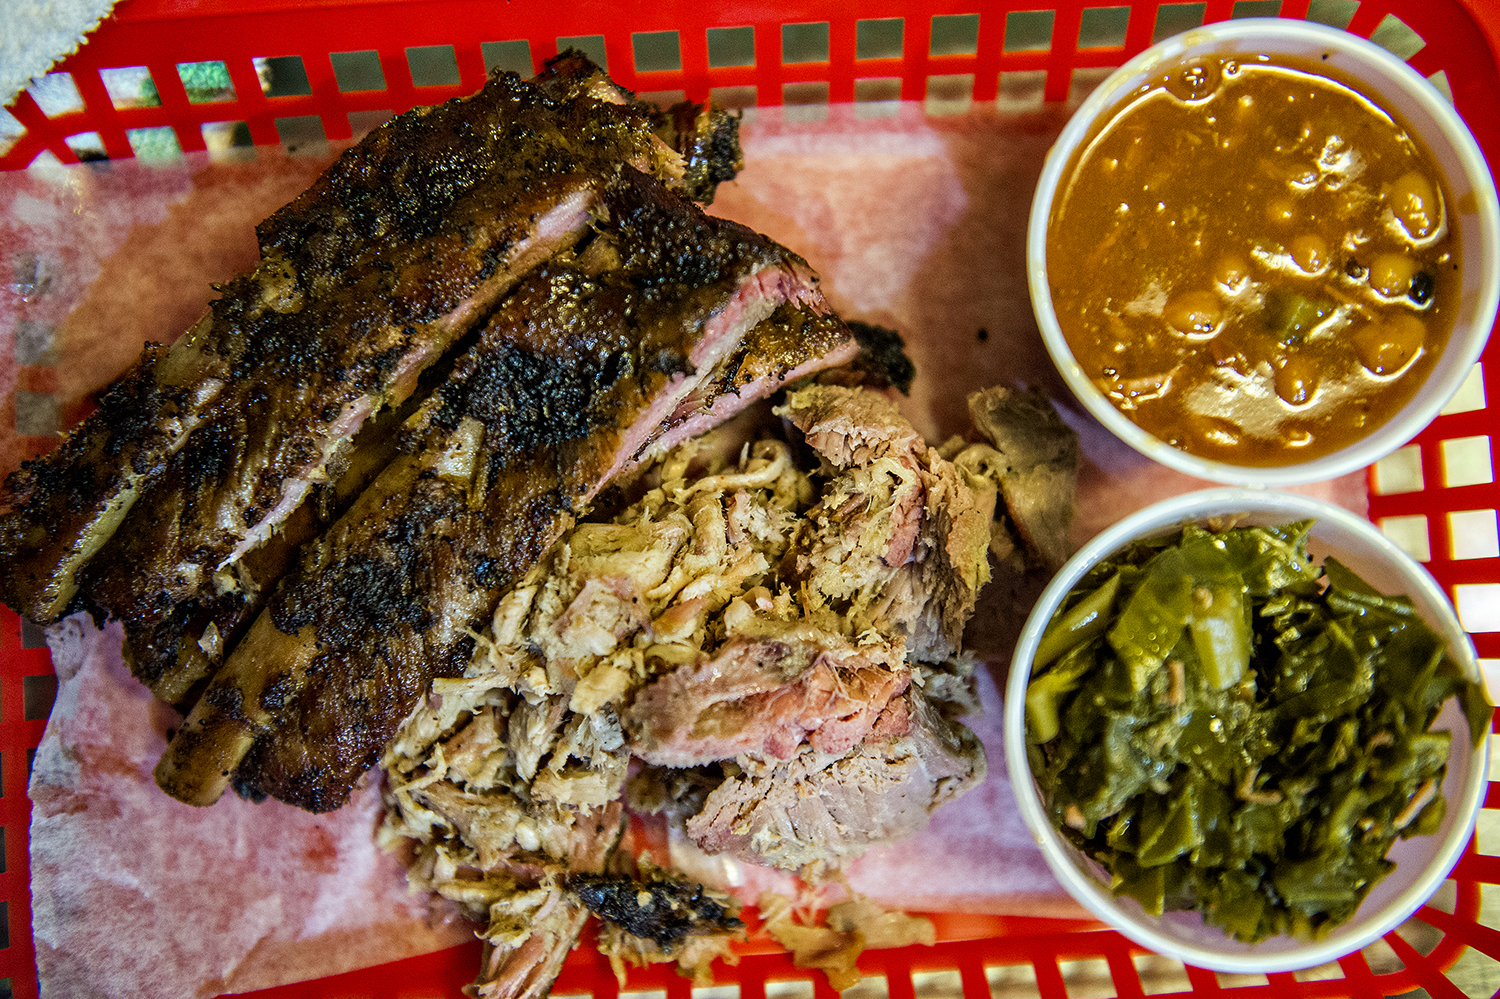 Ribs, chopped whole hog, baked beans, and collards at B's Cracklin' Barbeque.